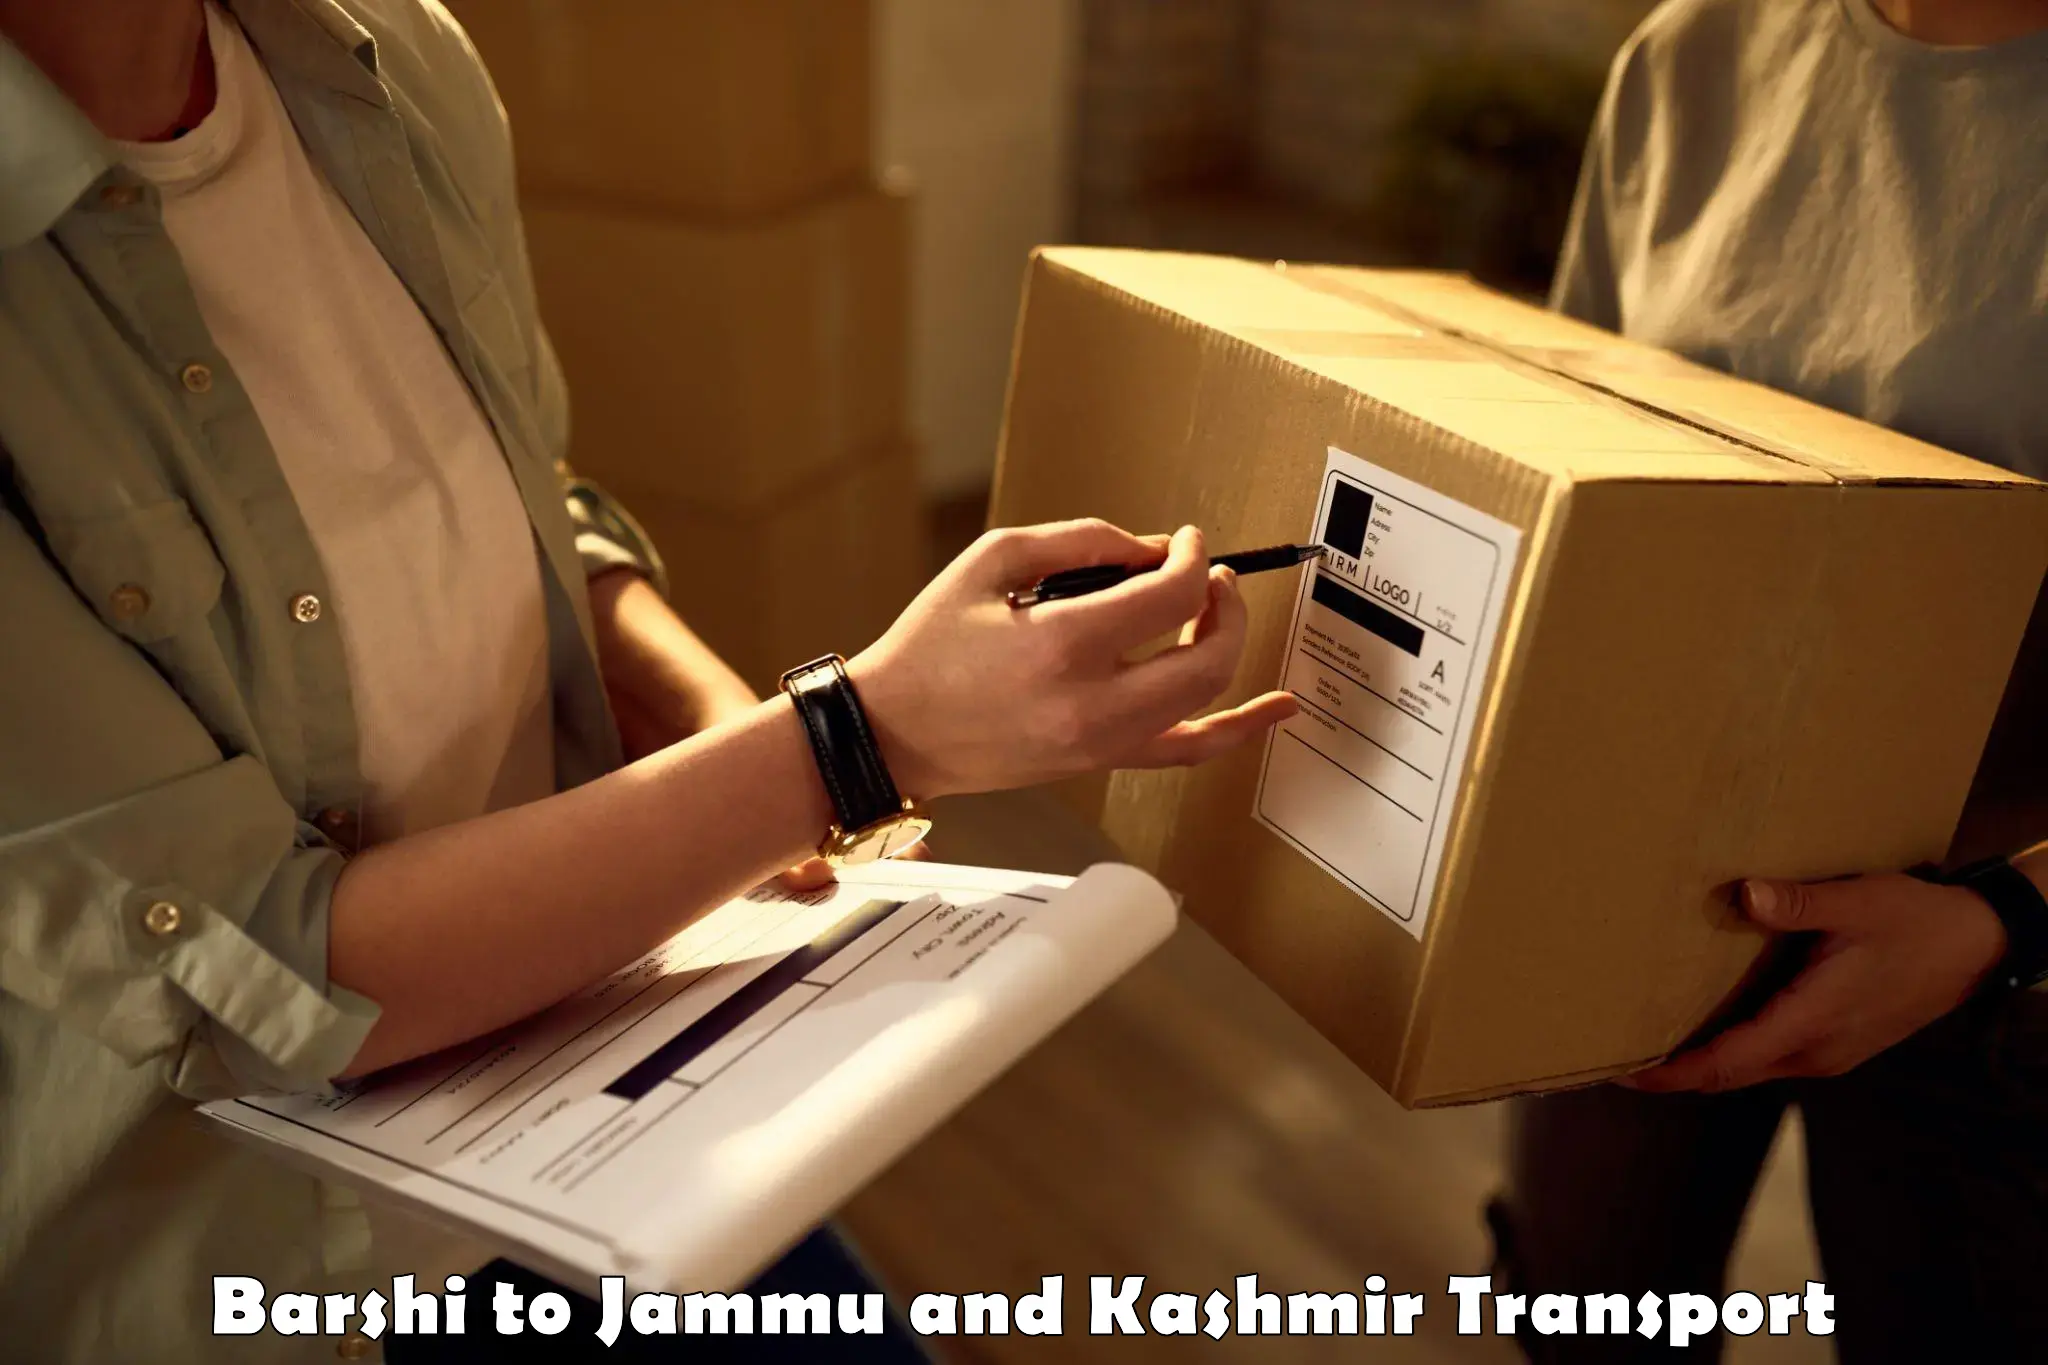 Truck transport companies in India Barshi to Jammu and Kashmir